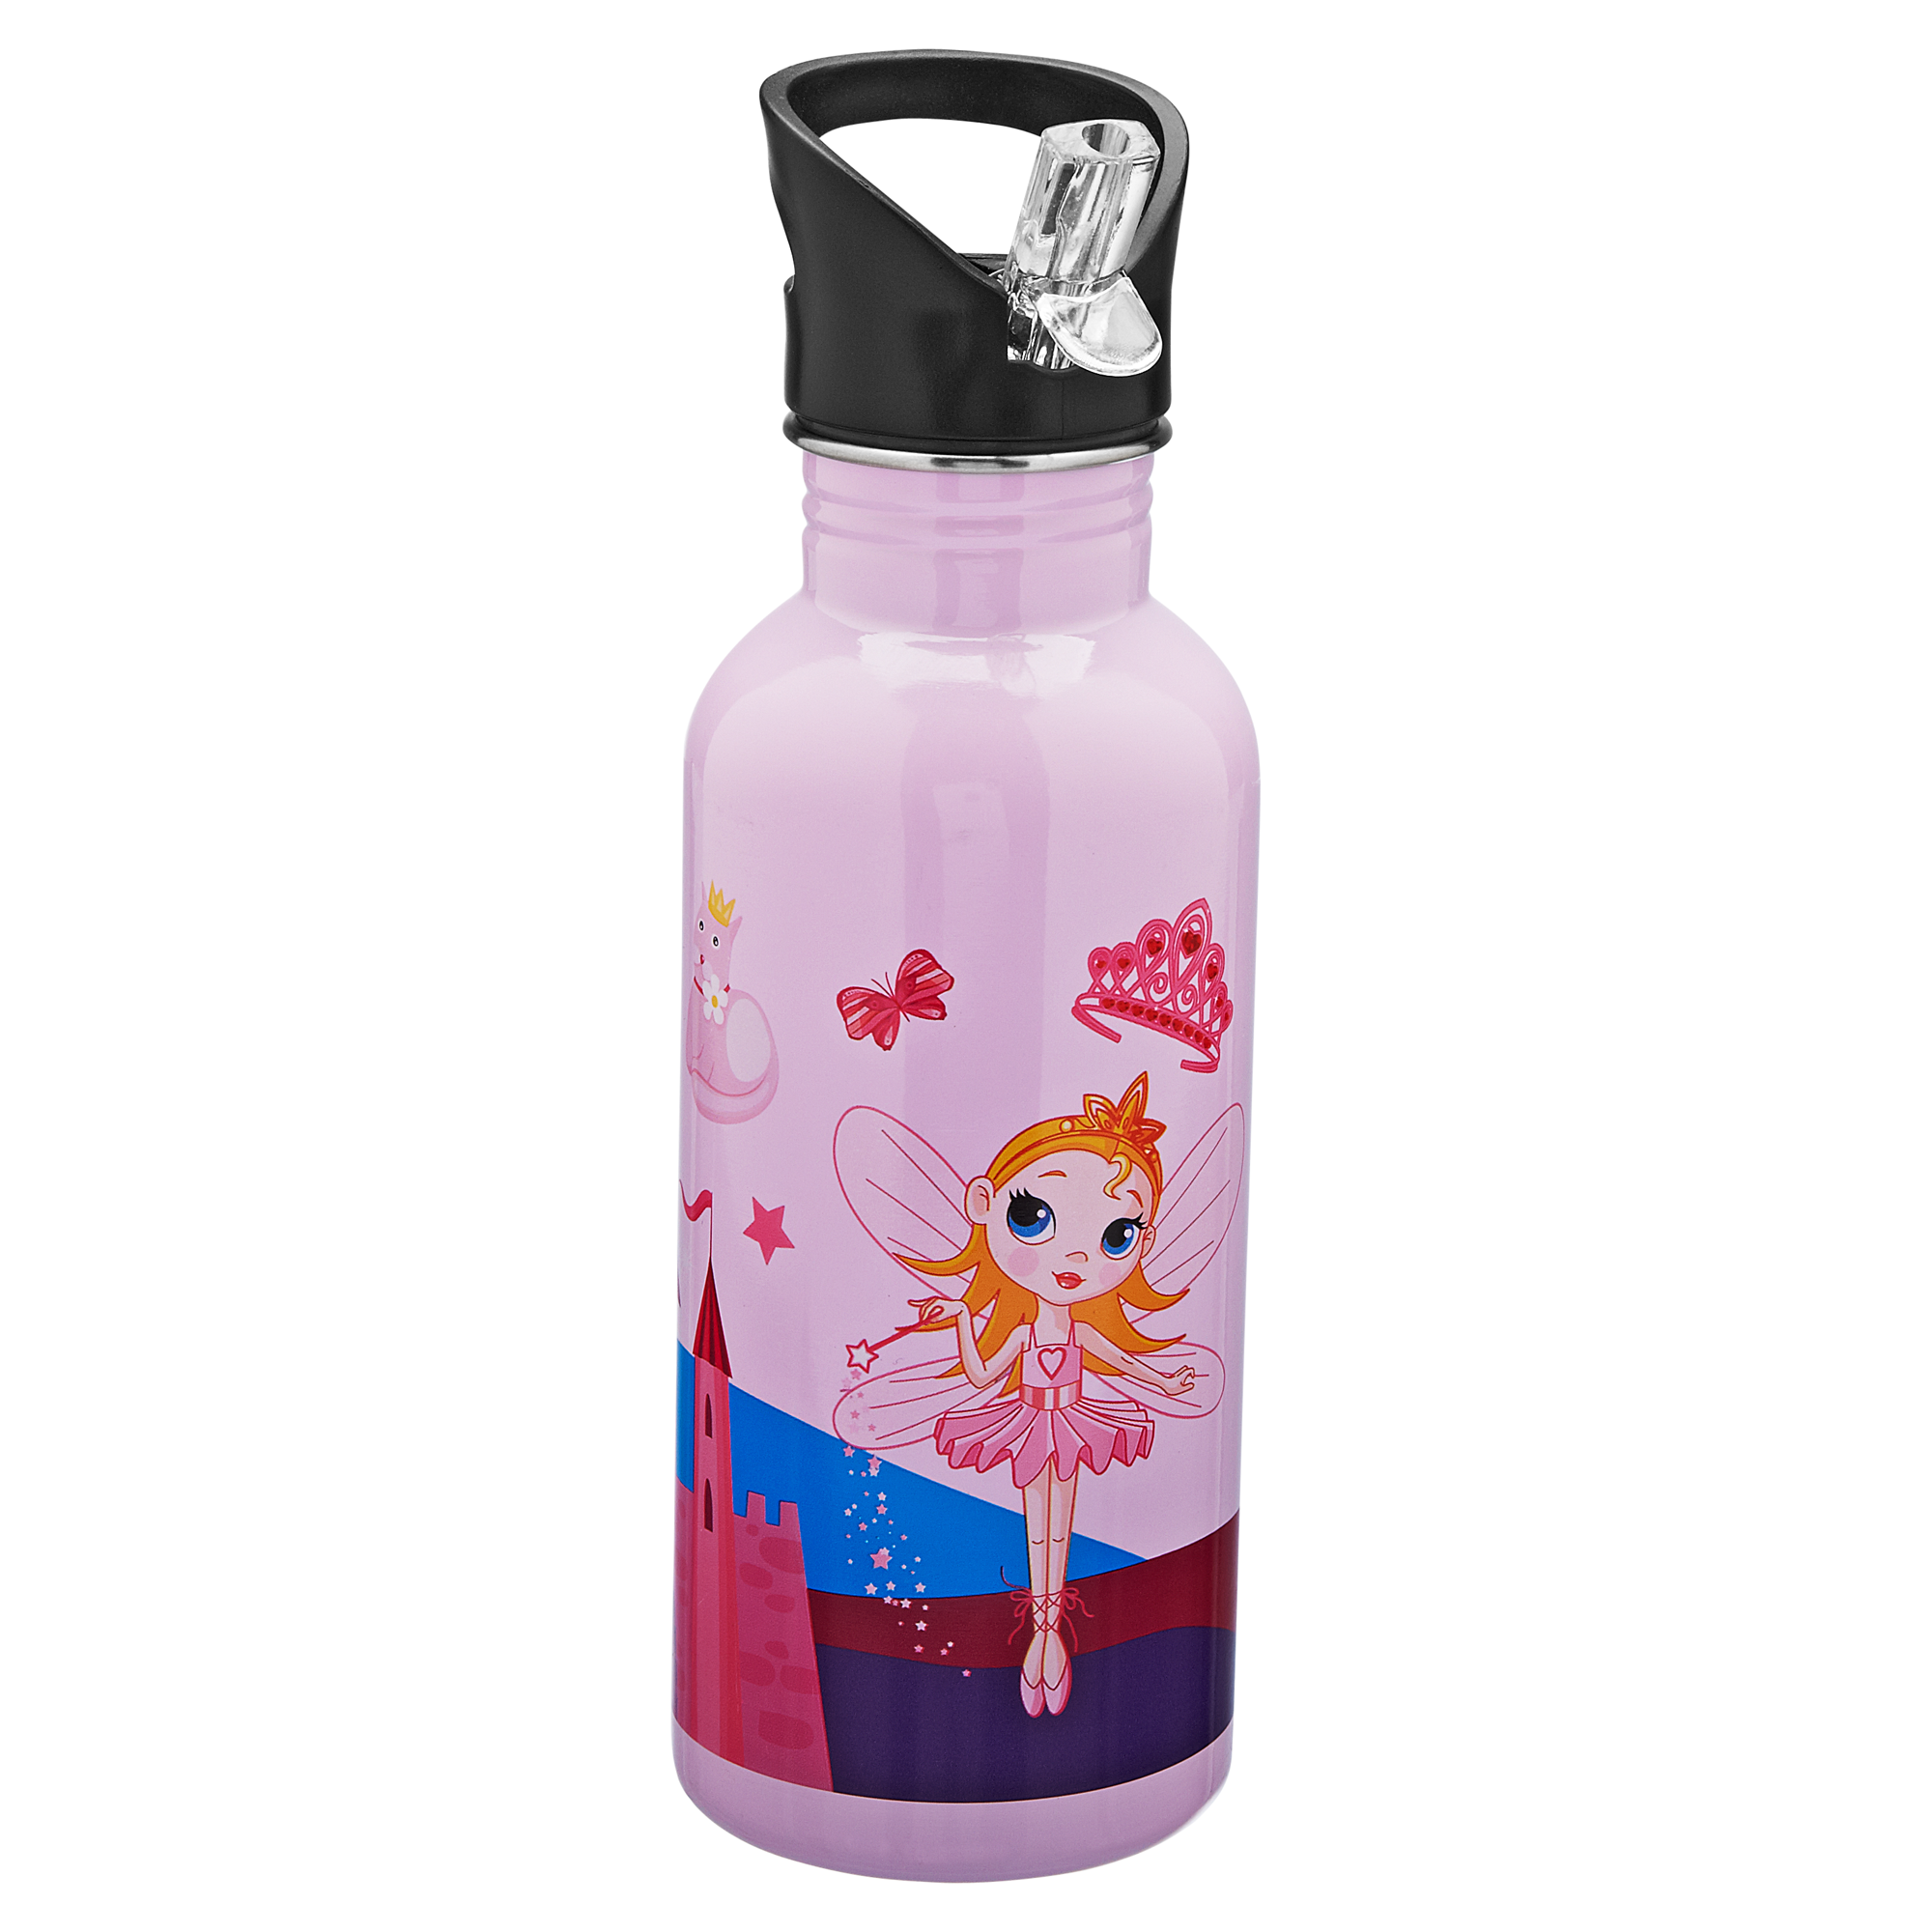 Trinkflasche "Prinzessin" 600 ml + product picture